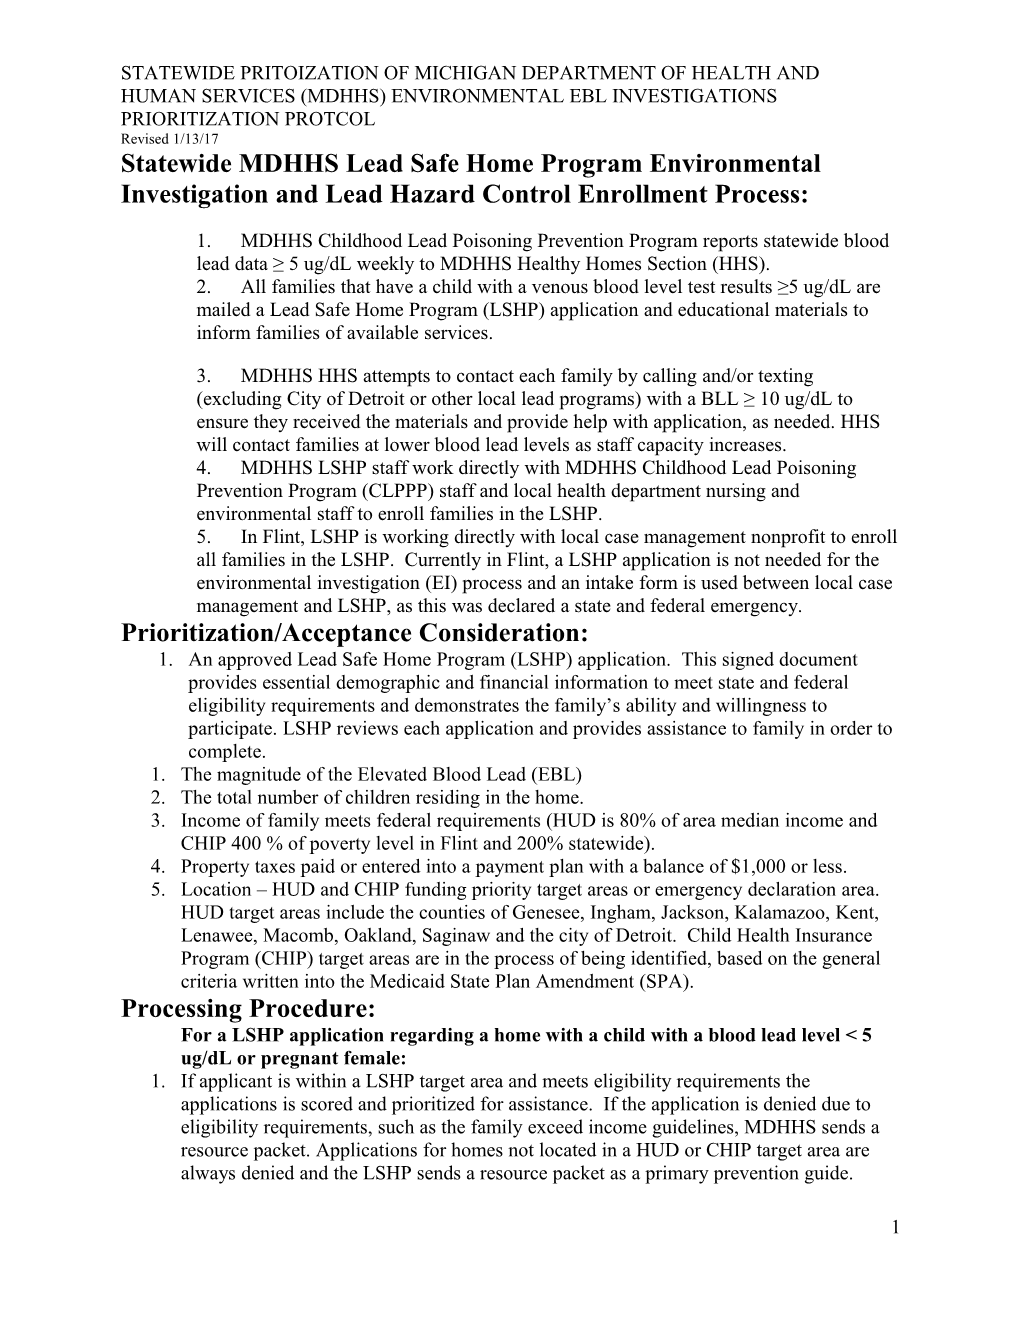 Statewide MDHHS Lead Safe Home Program Environmental Investigation and Lead Hazard Control